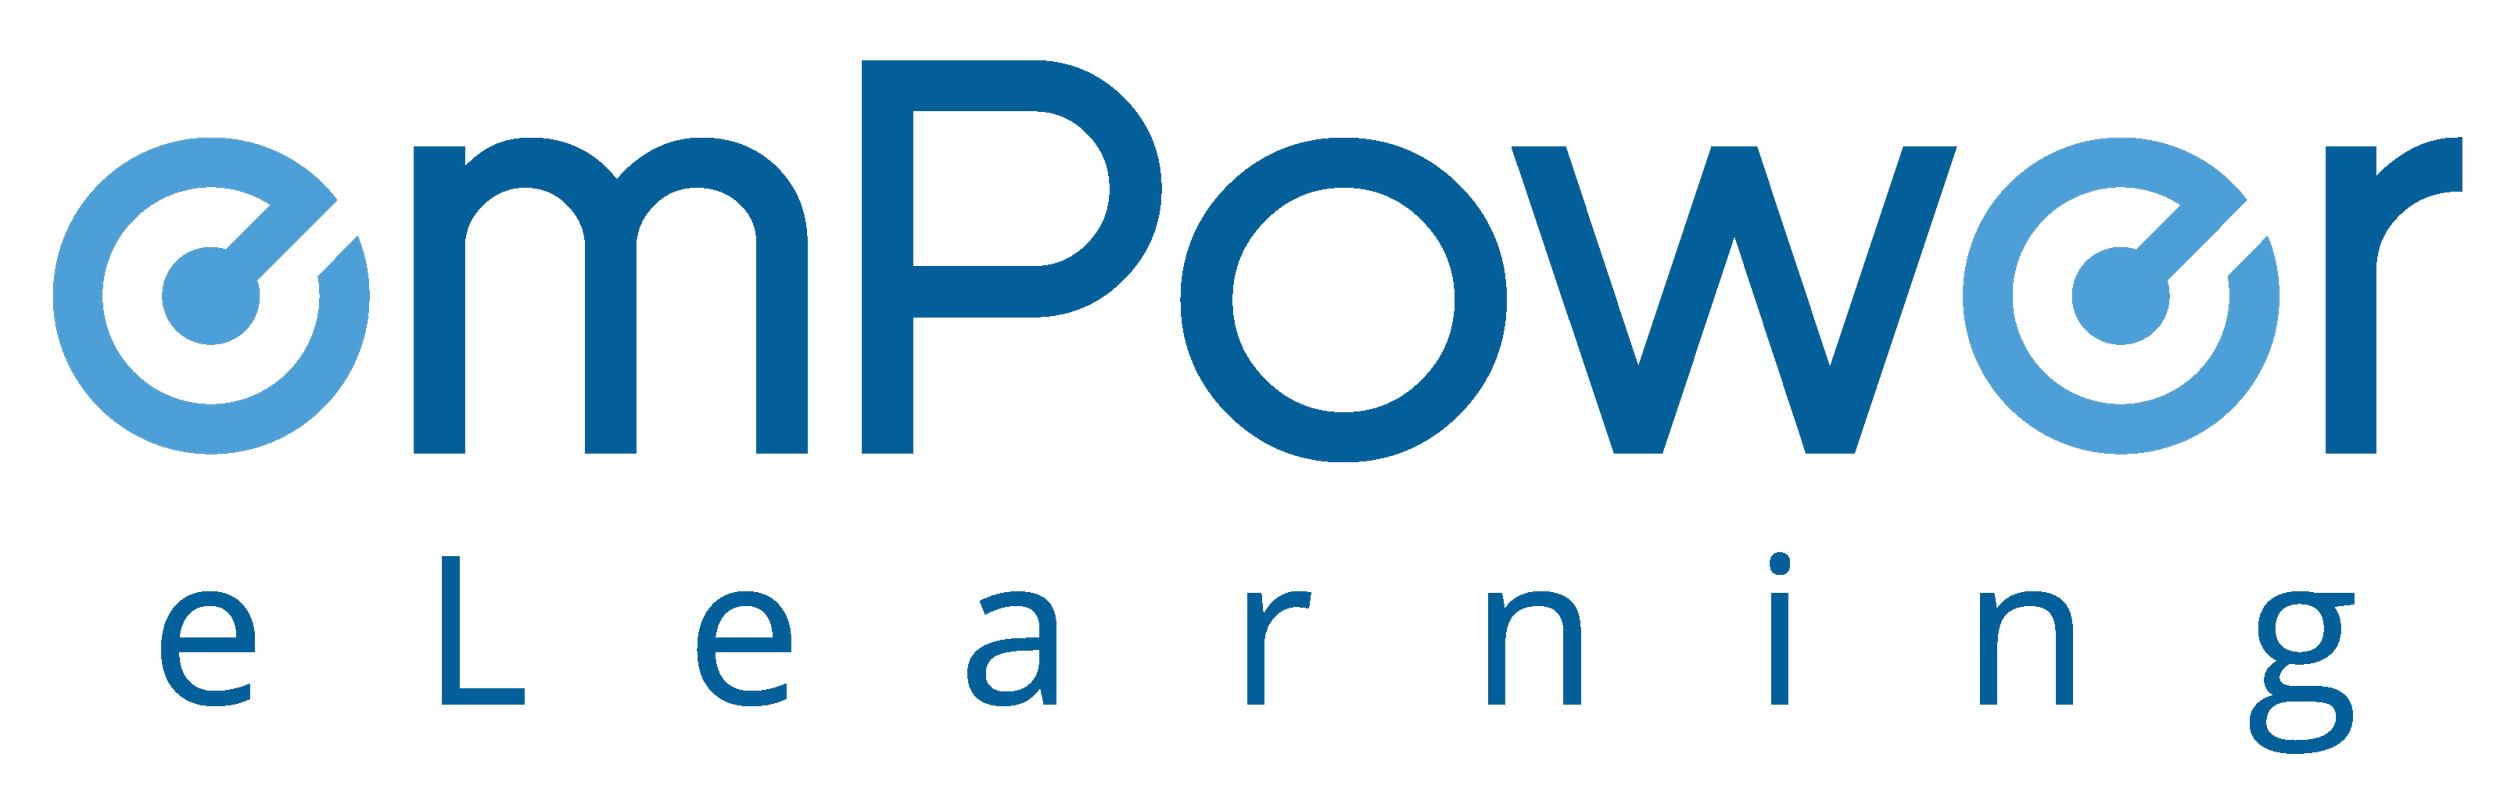 Empower-eLearning_Logo_1-min.png